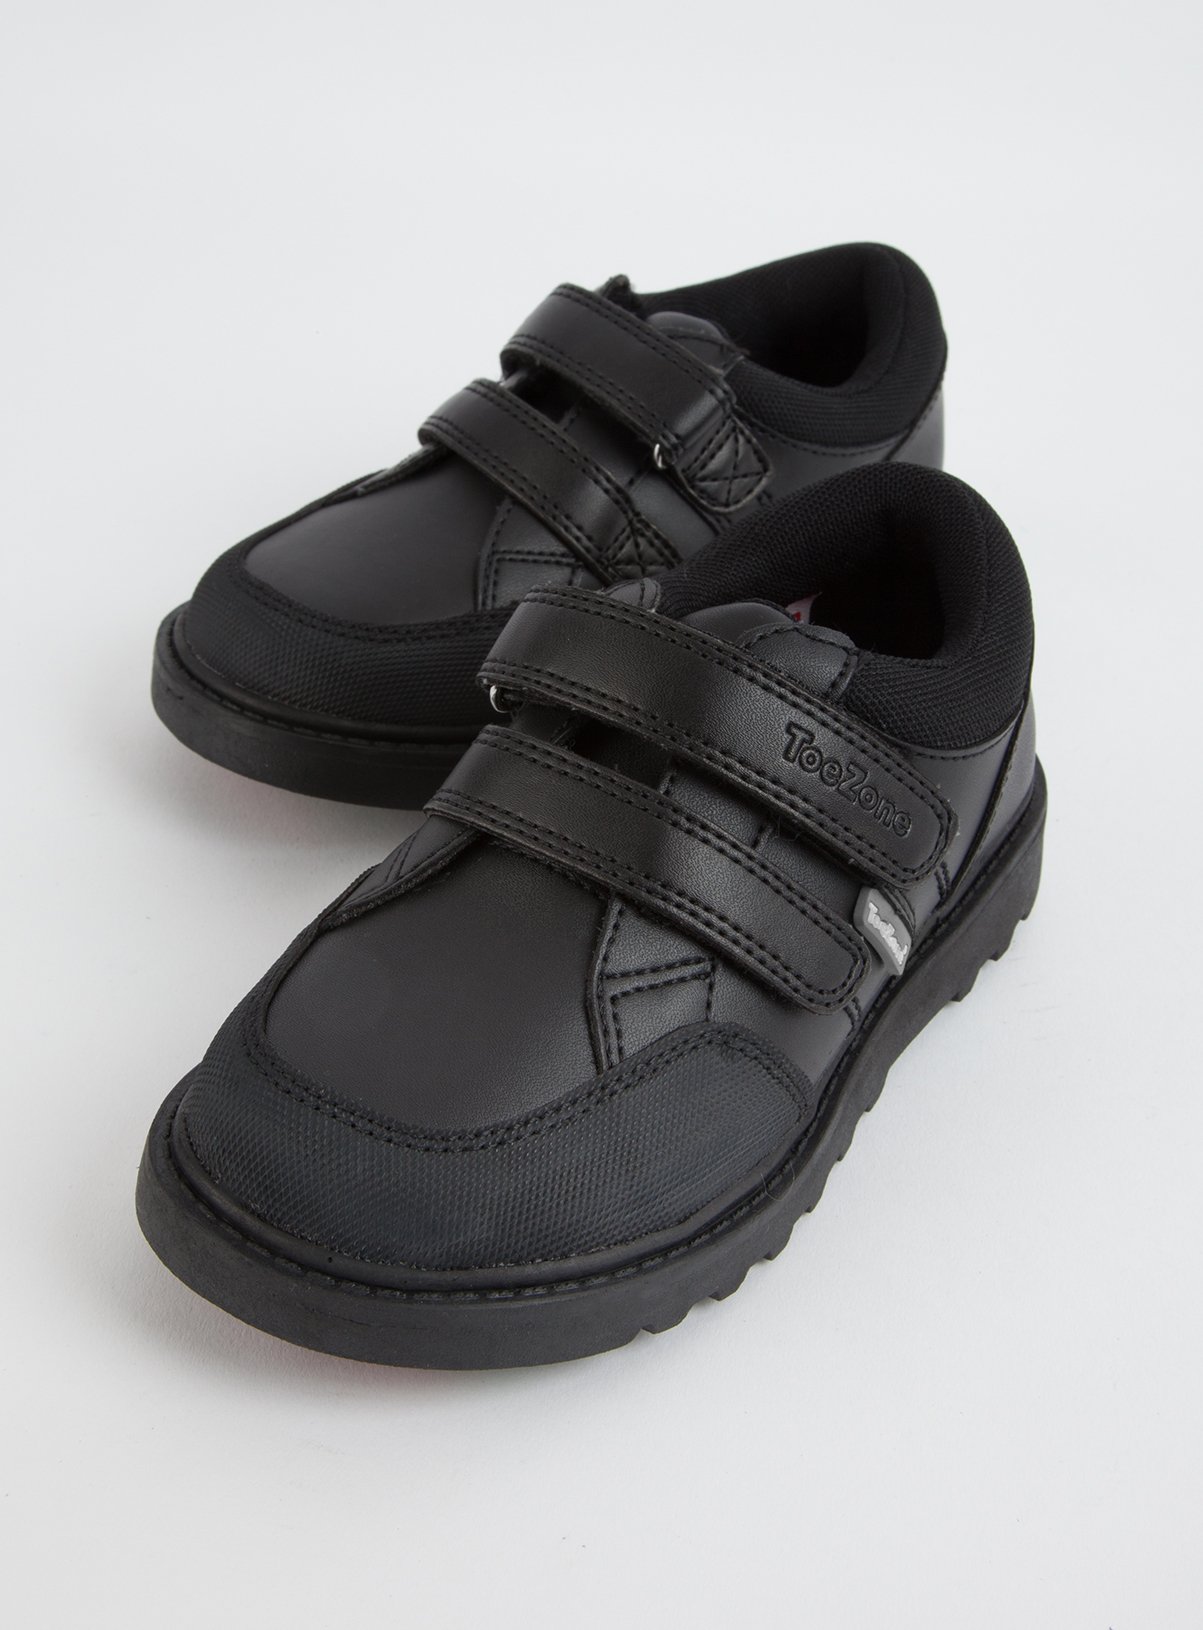 TOEZONE Black Leather Smart Trainer Review